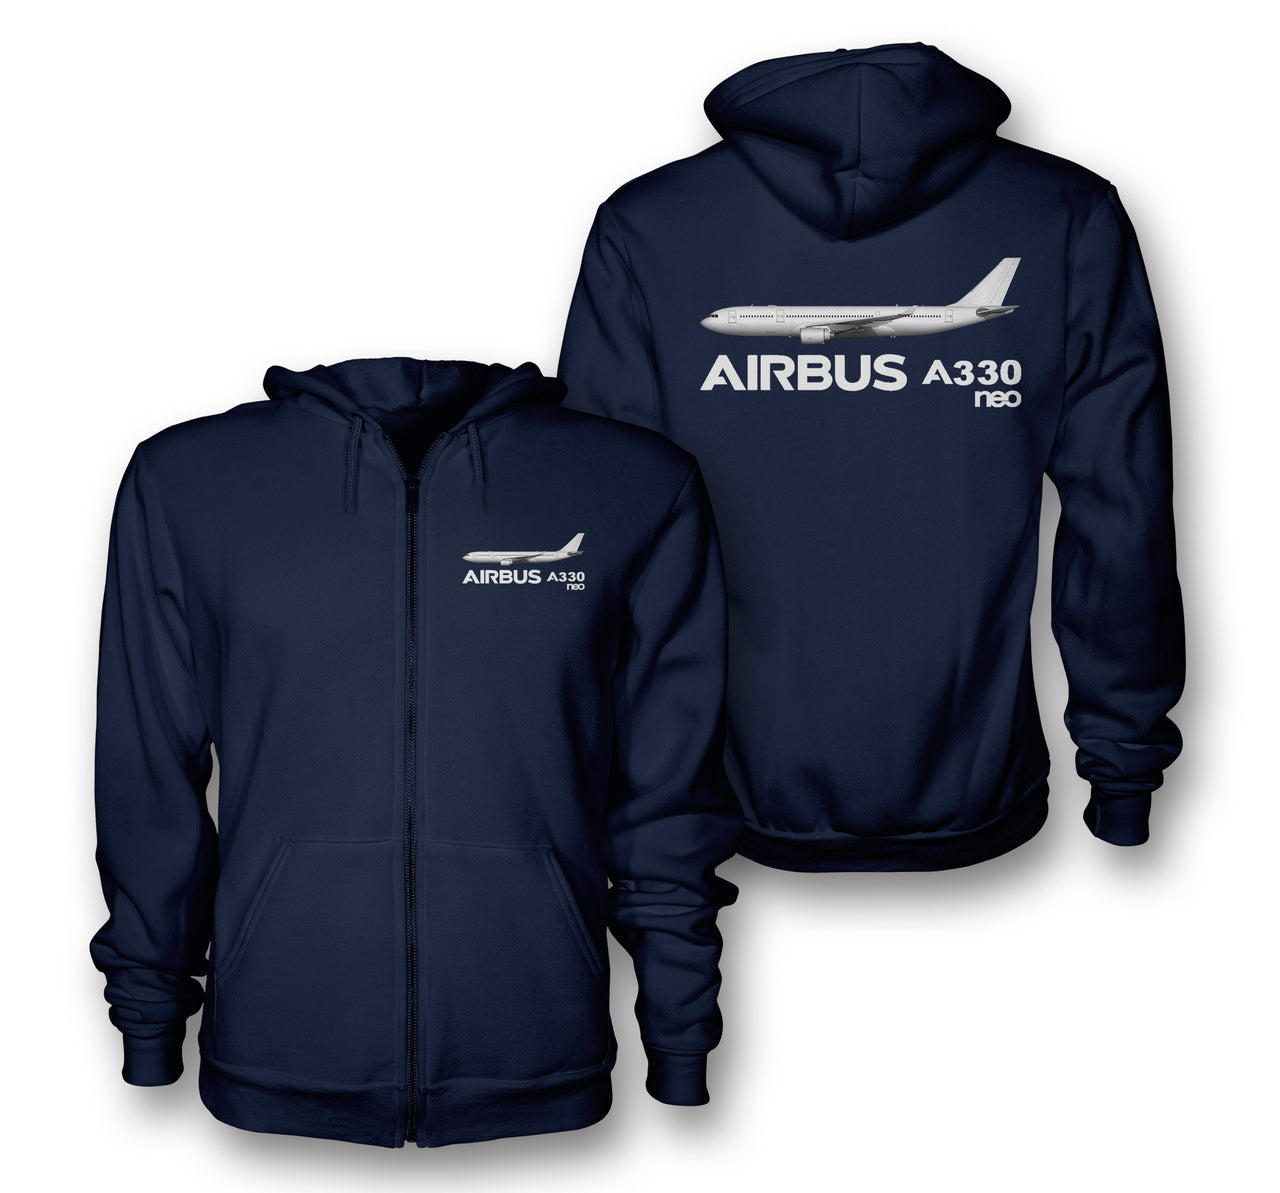 The Airbus A330neo Designed Zipped Hoodies